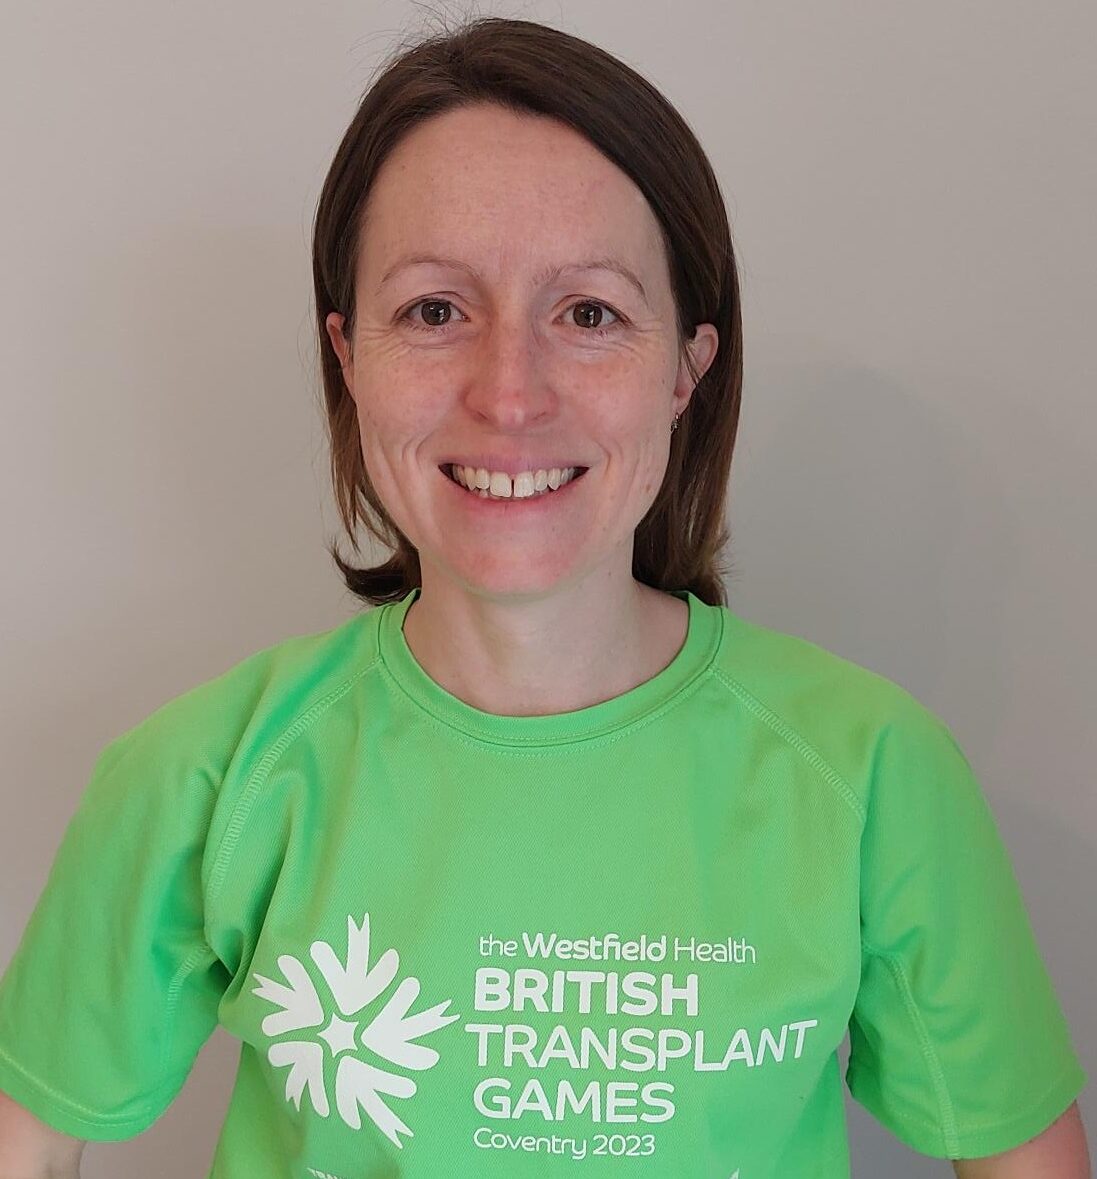 Michelle Evans in a green shirt for the British Transplant Games.